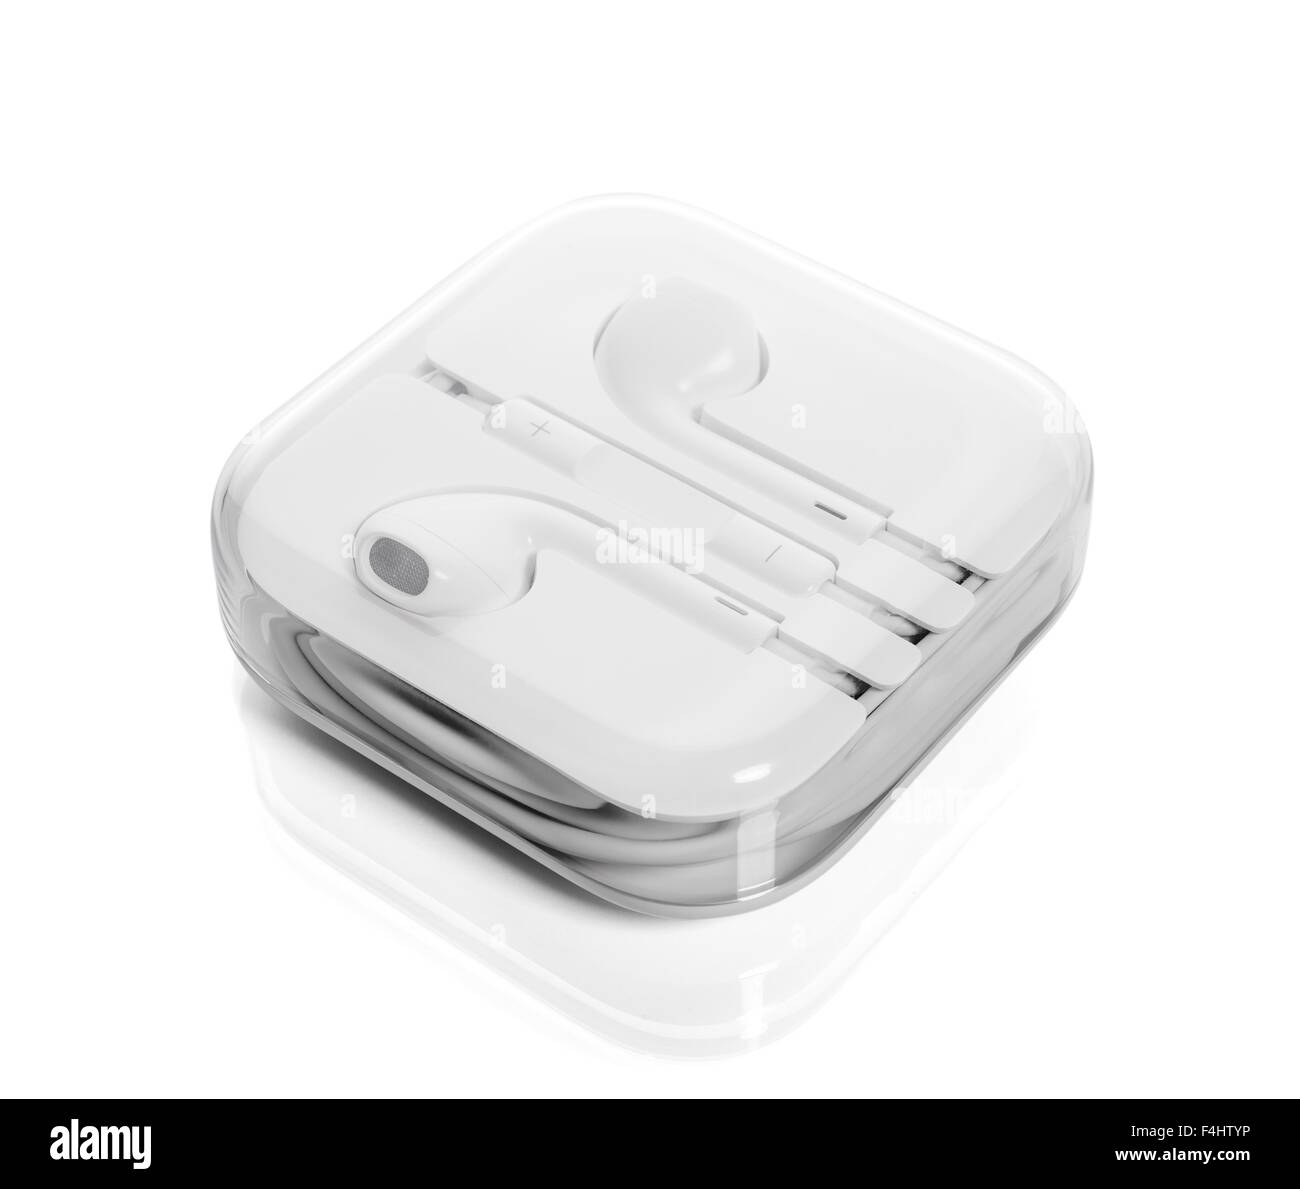 Headphones on a white background, isolated Stock Photo